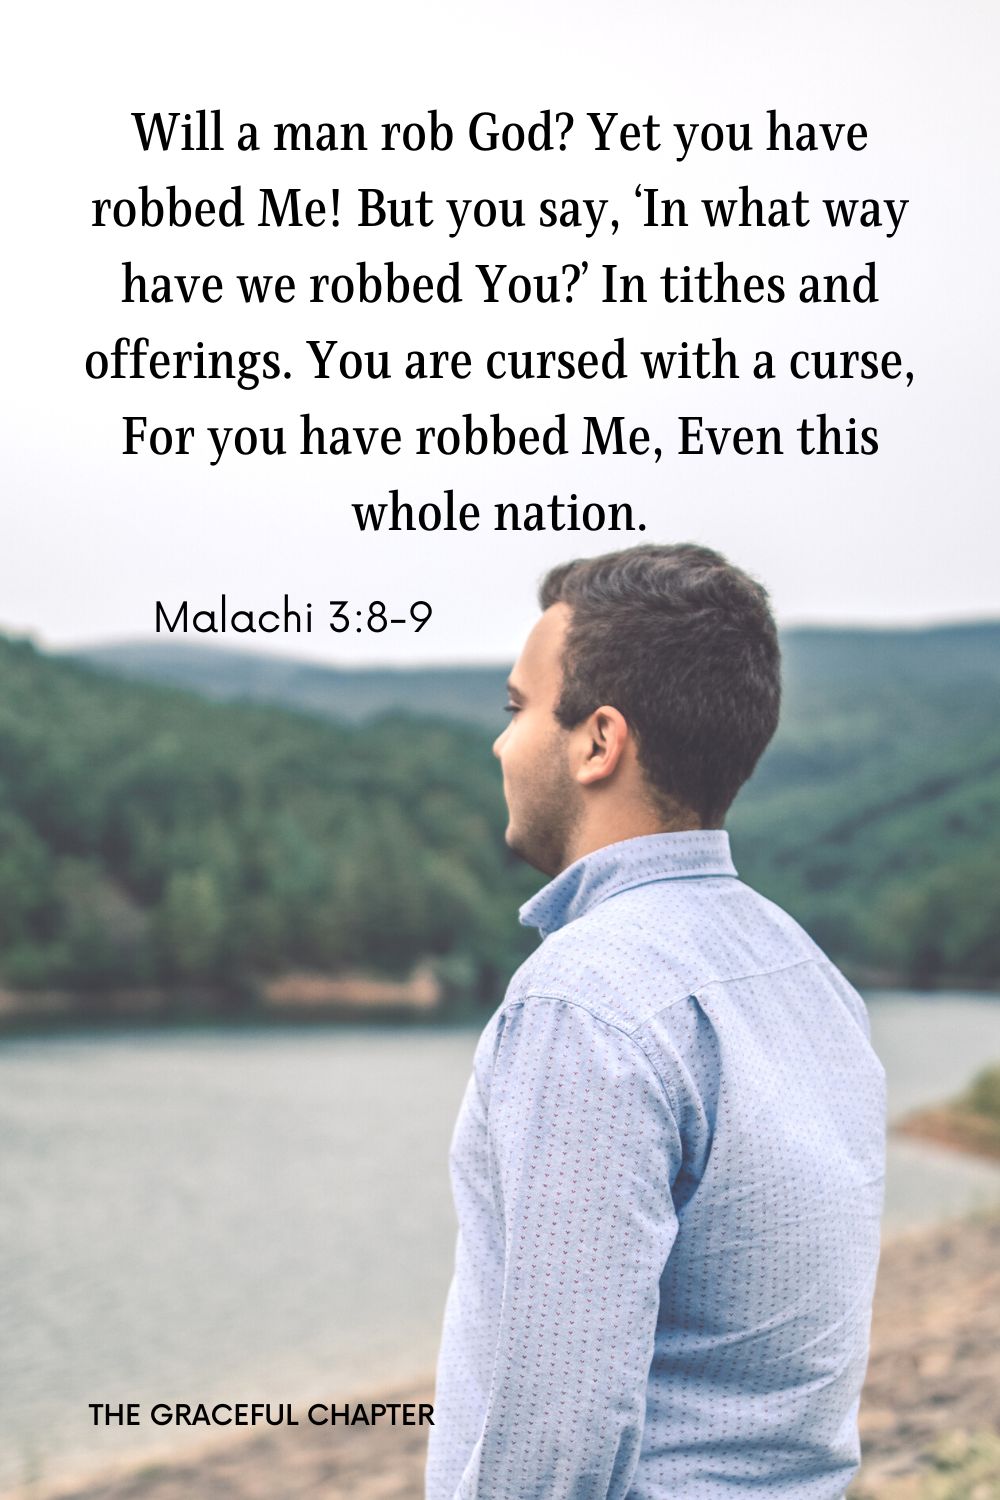 Will a man rob God? Yet you have robbed Me! But you say, ‘In what way have we robbed You?’ In tithes and offerings. You are cursed with a curse, For you have robbed Me, Even this whole nation. Malachi 3:8-9